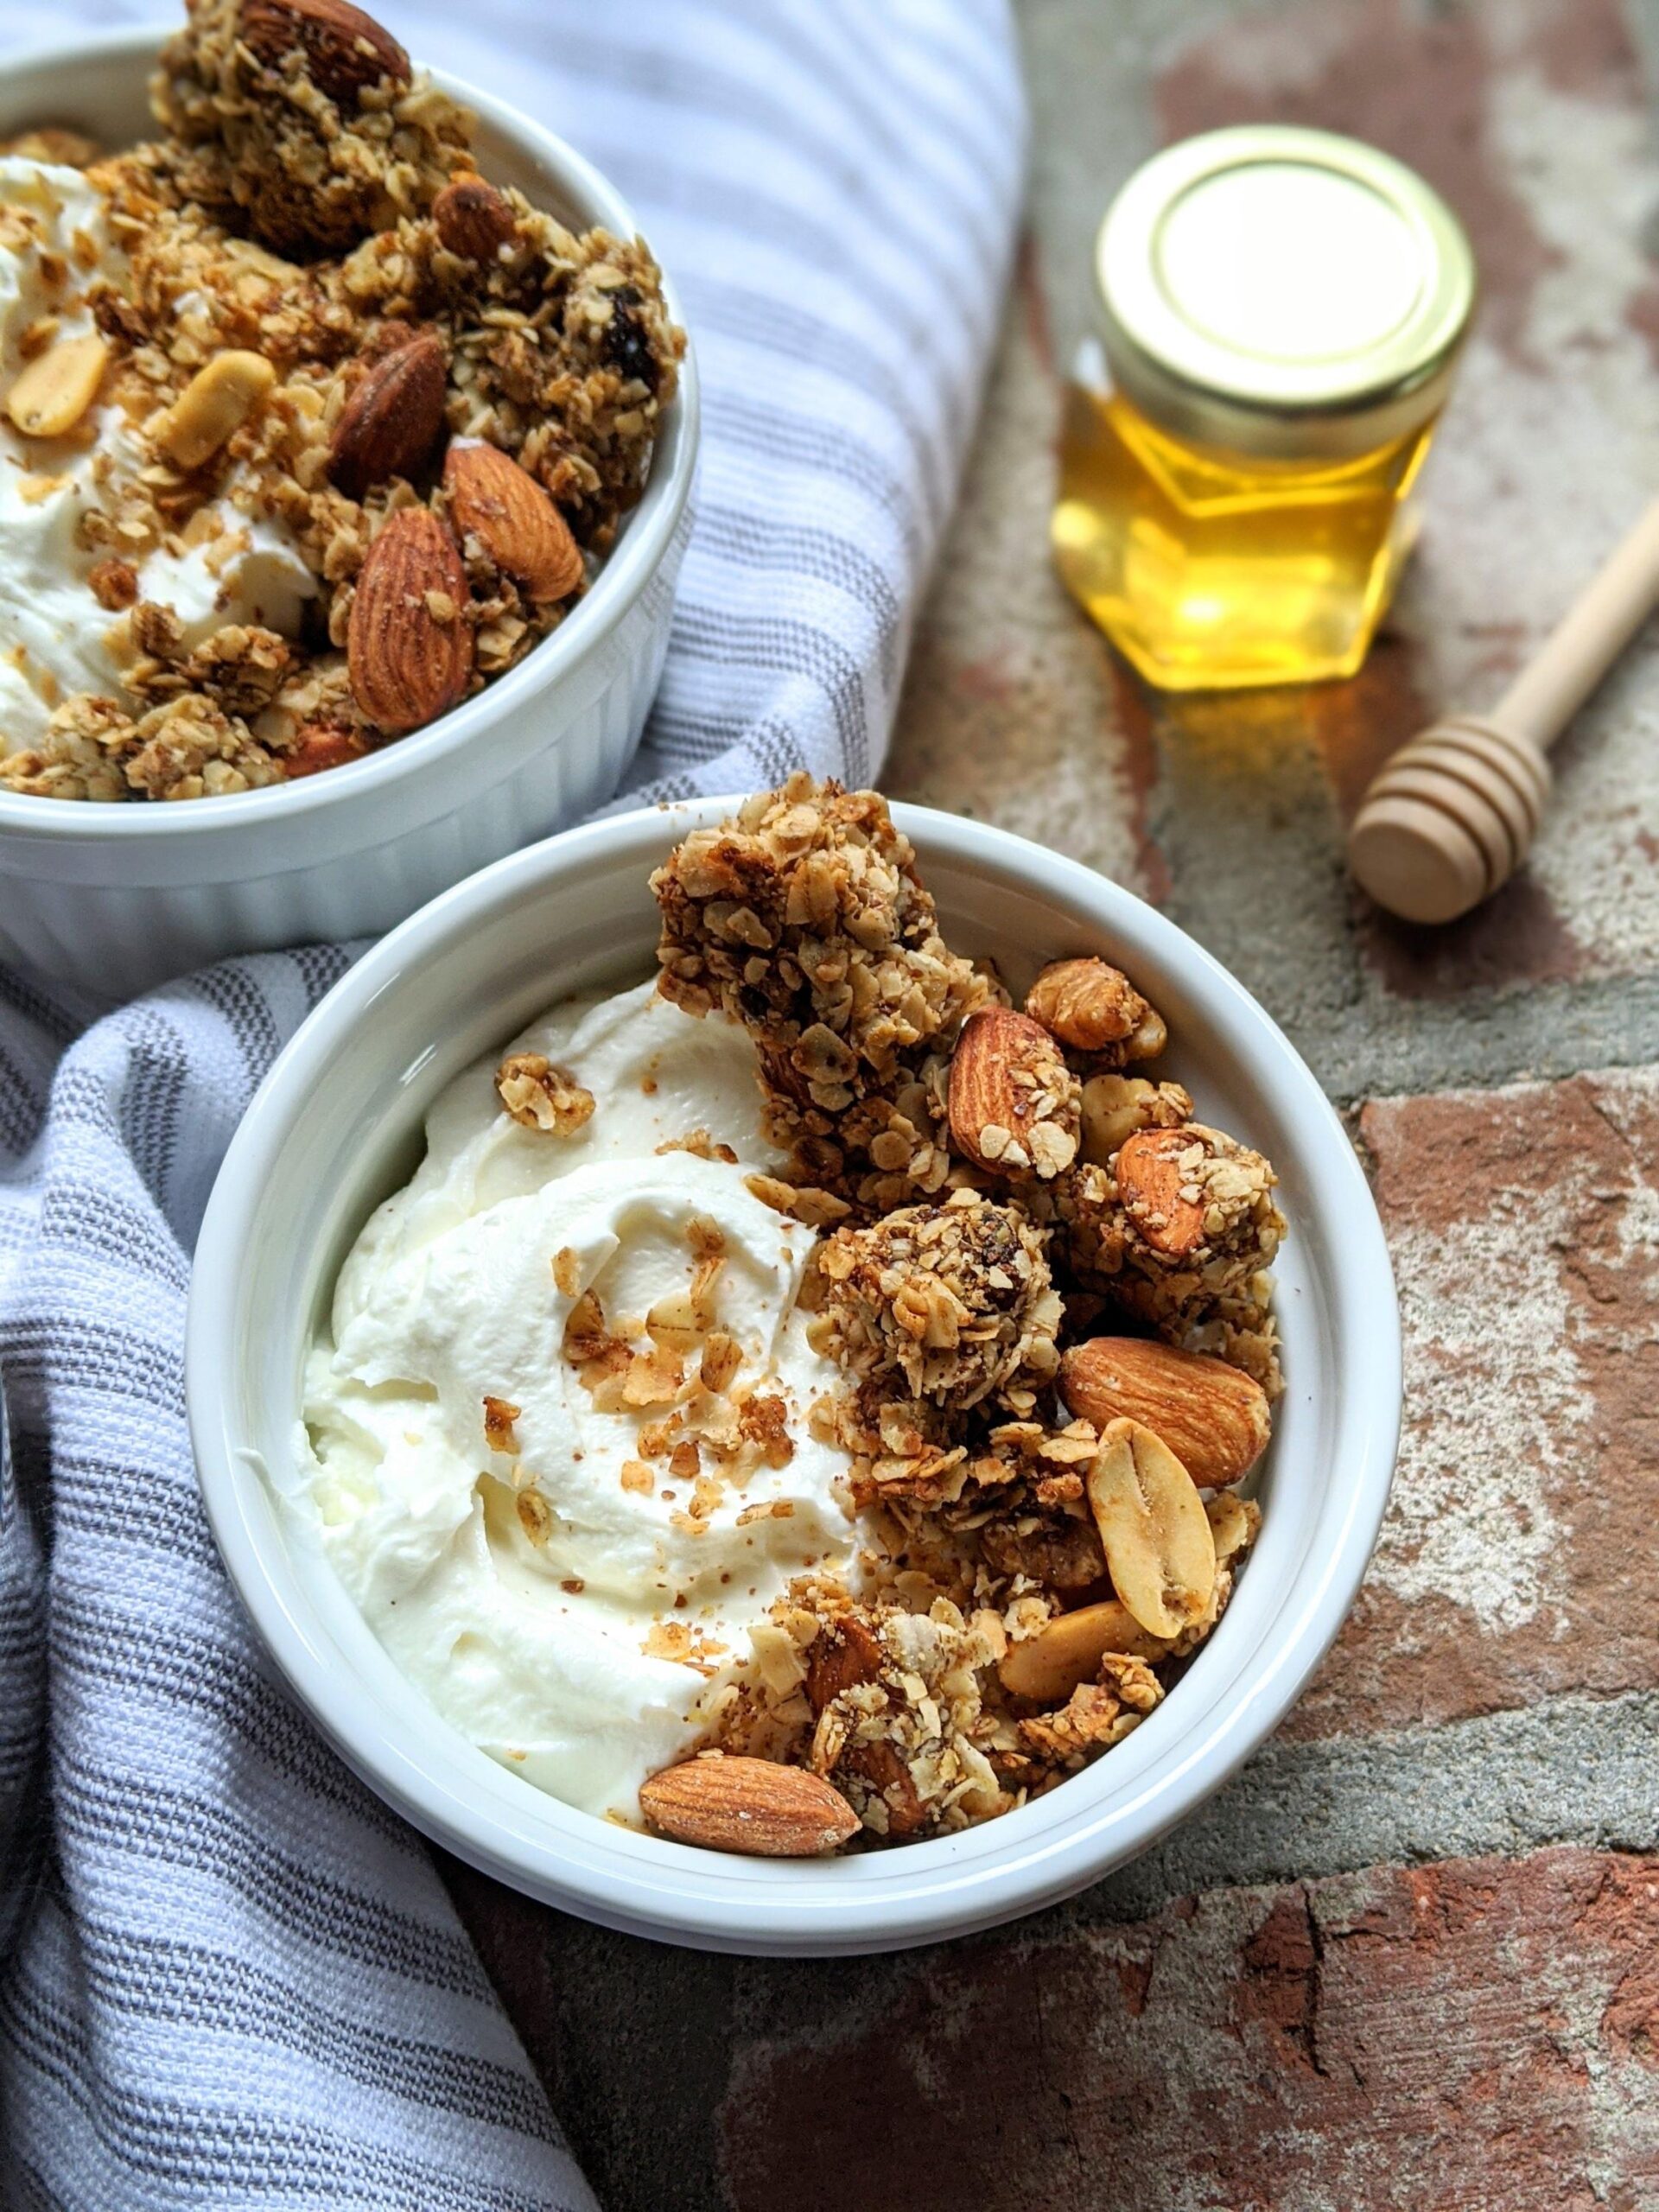  Searching for a gluten-free breakfast option that's packed with flavor? This honey granola is your answer!